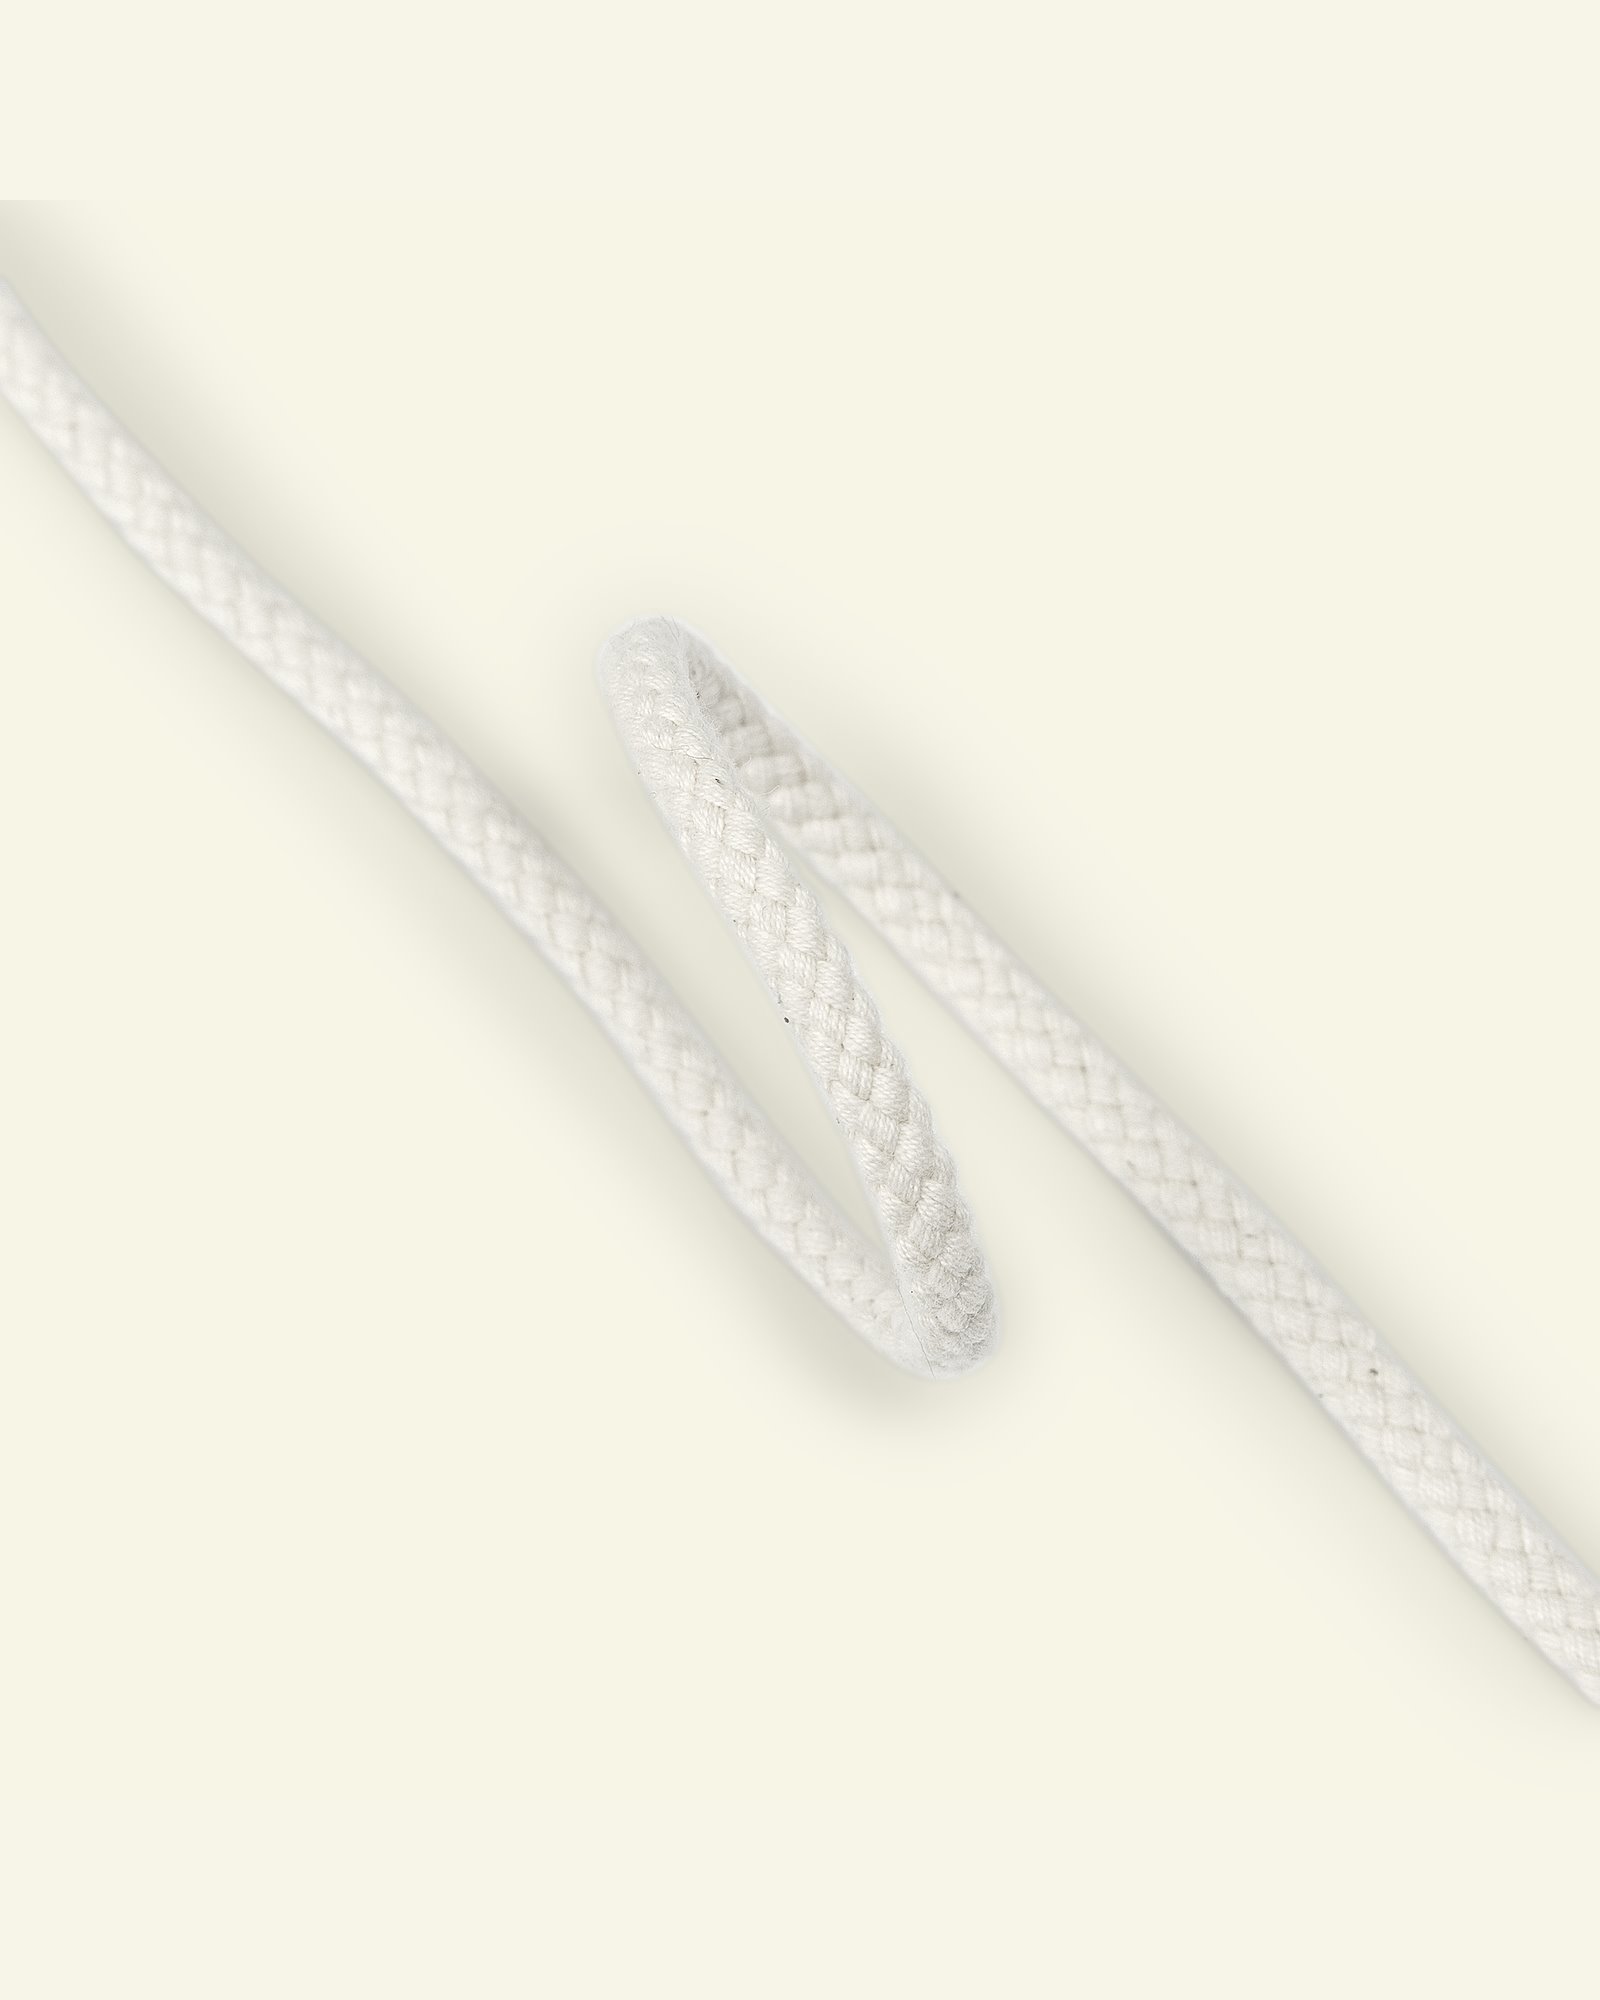 Anorak cord 4,5mm cotton unbleached 5m 75203_pack